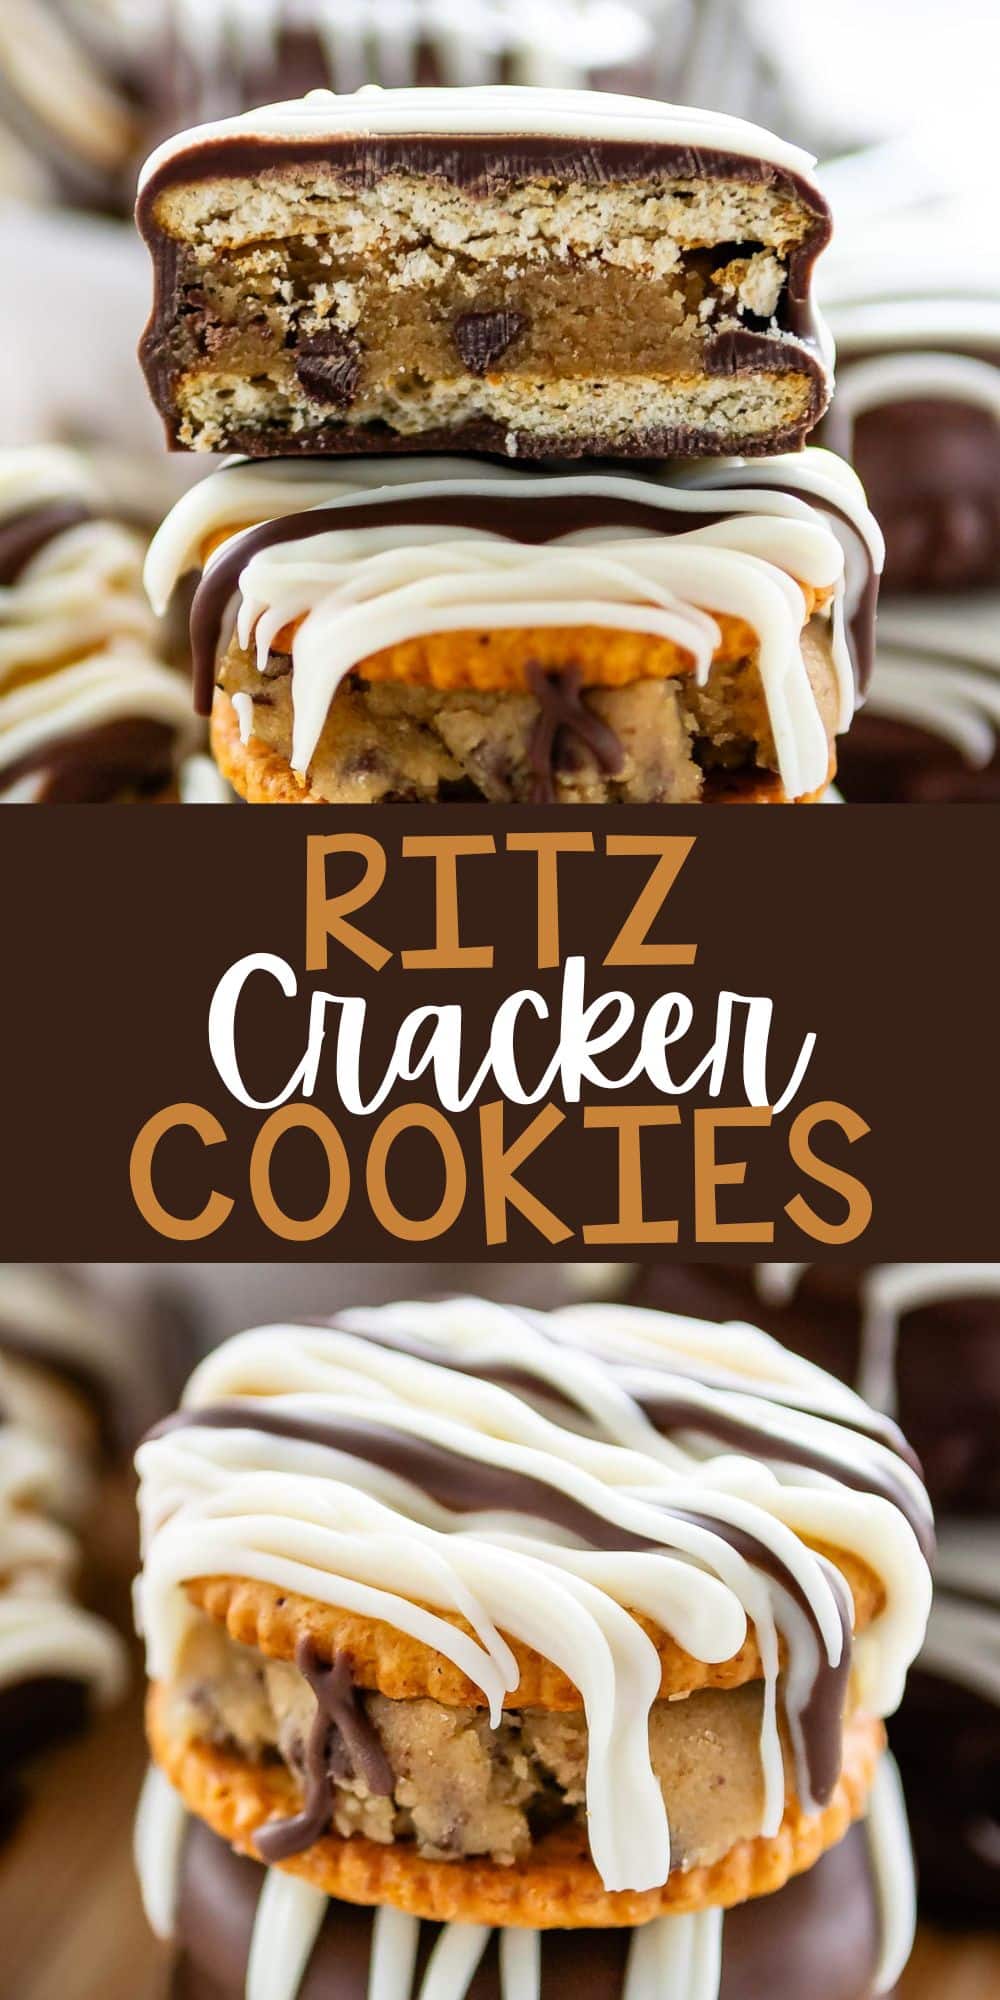 two photos of stacked ritz crackers covered in chocolate with cookie dough in the middle with words on the image.